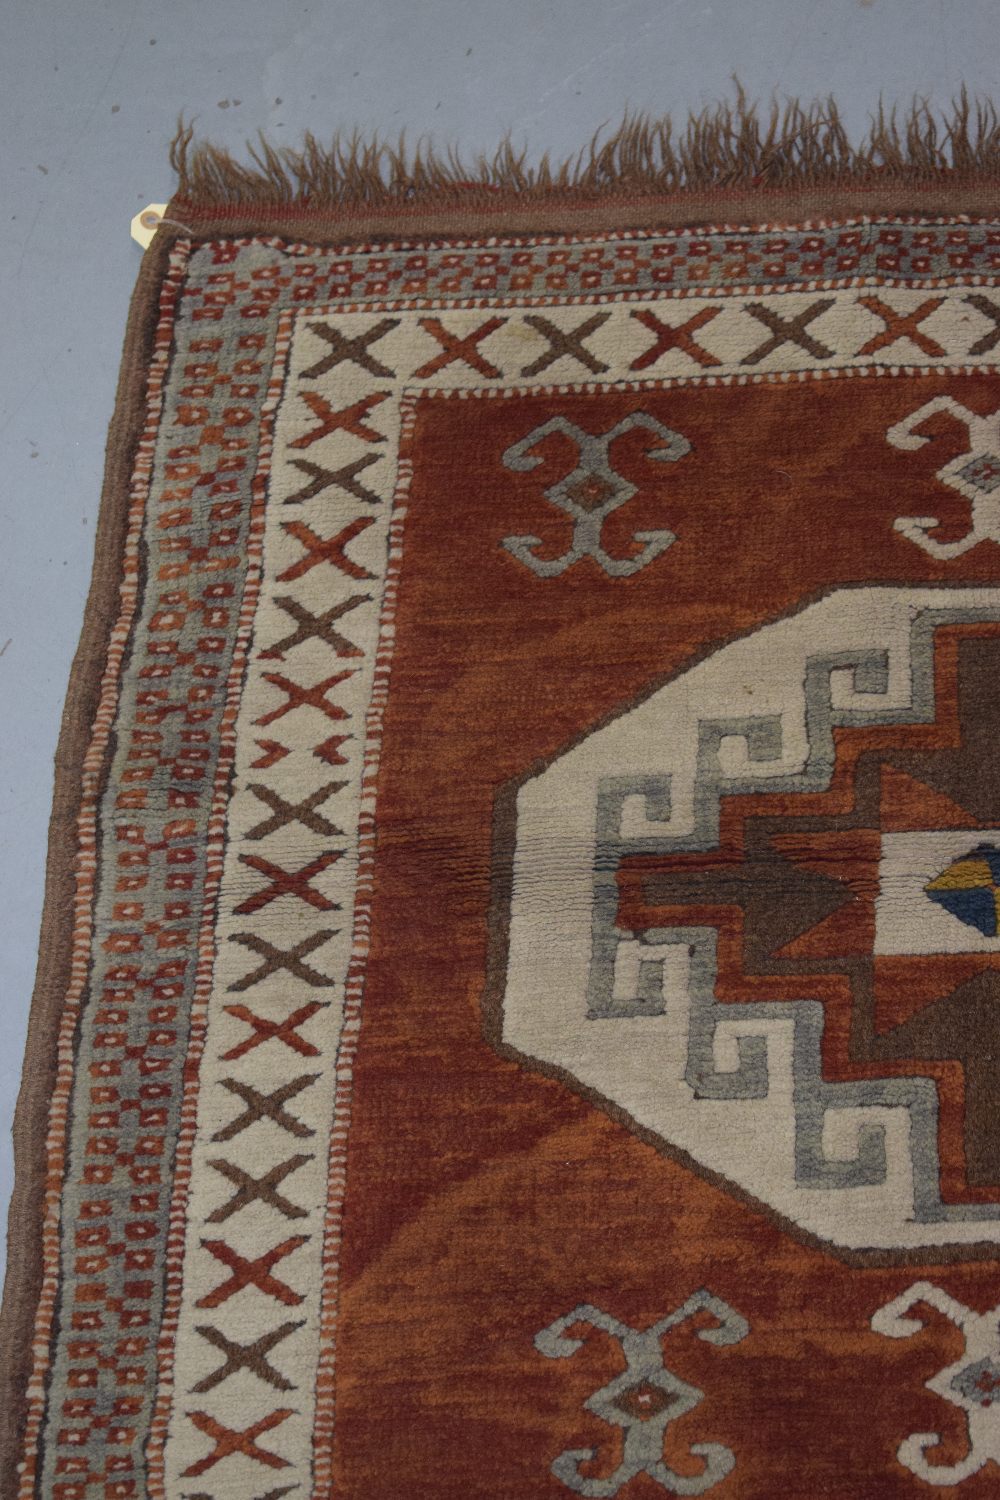 Two Anatolian rugs, the first: Konya kelim, central Anatolia, circa 1940s-50s, 4ft. 11in. X 3ft. - Image 13 of 17